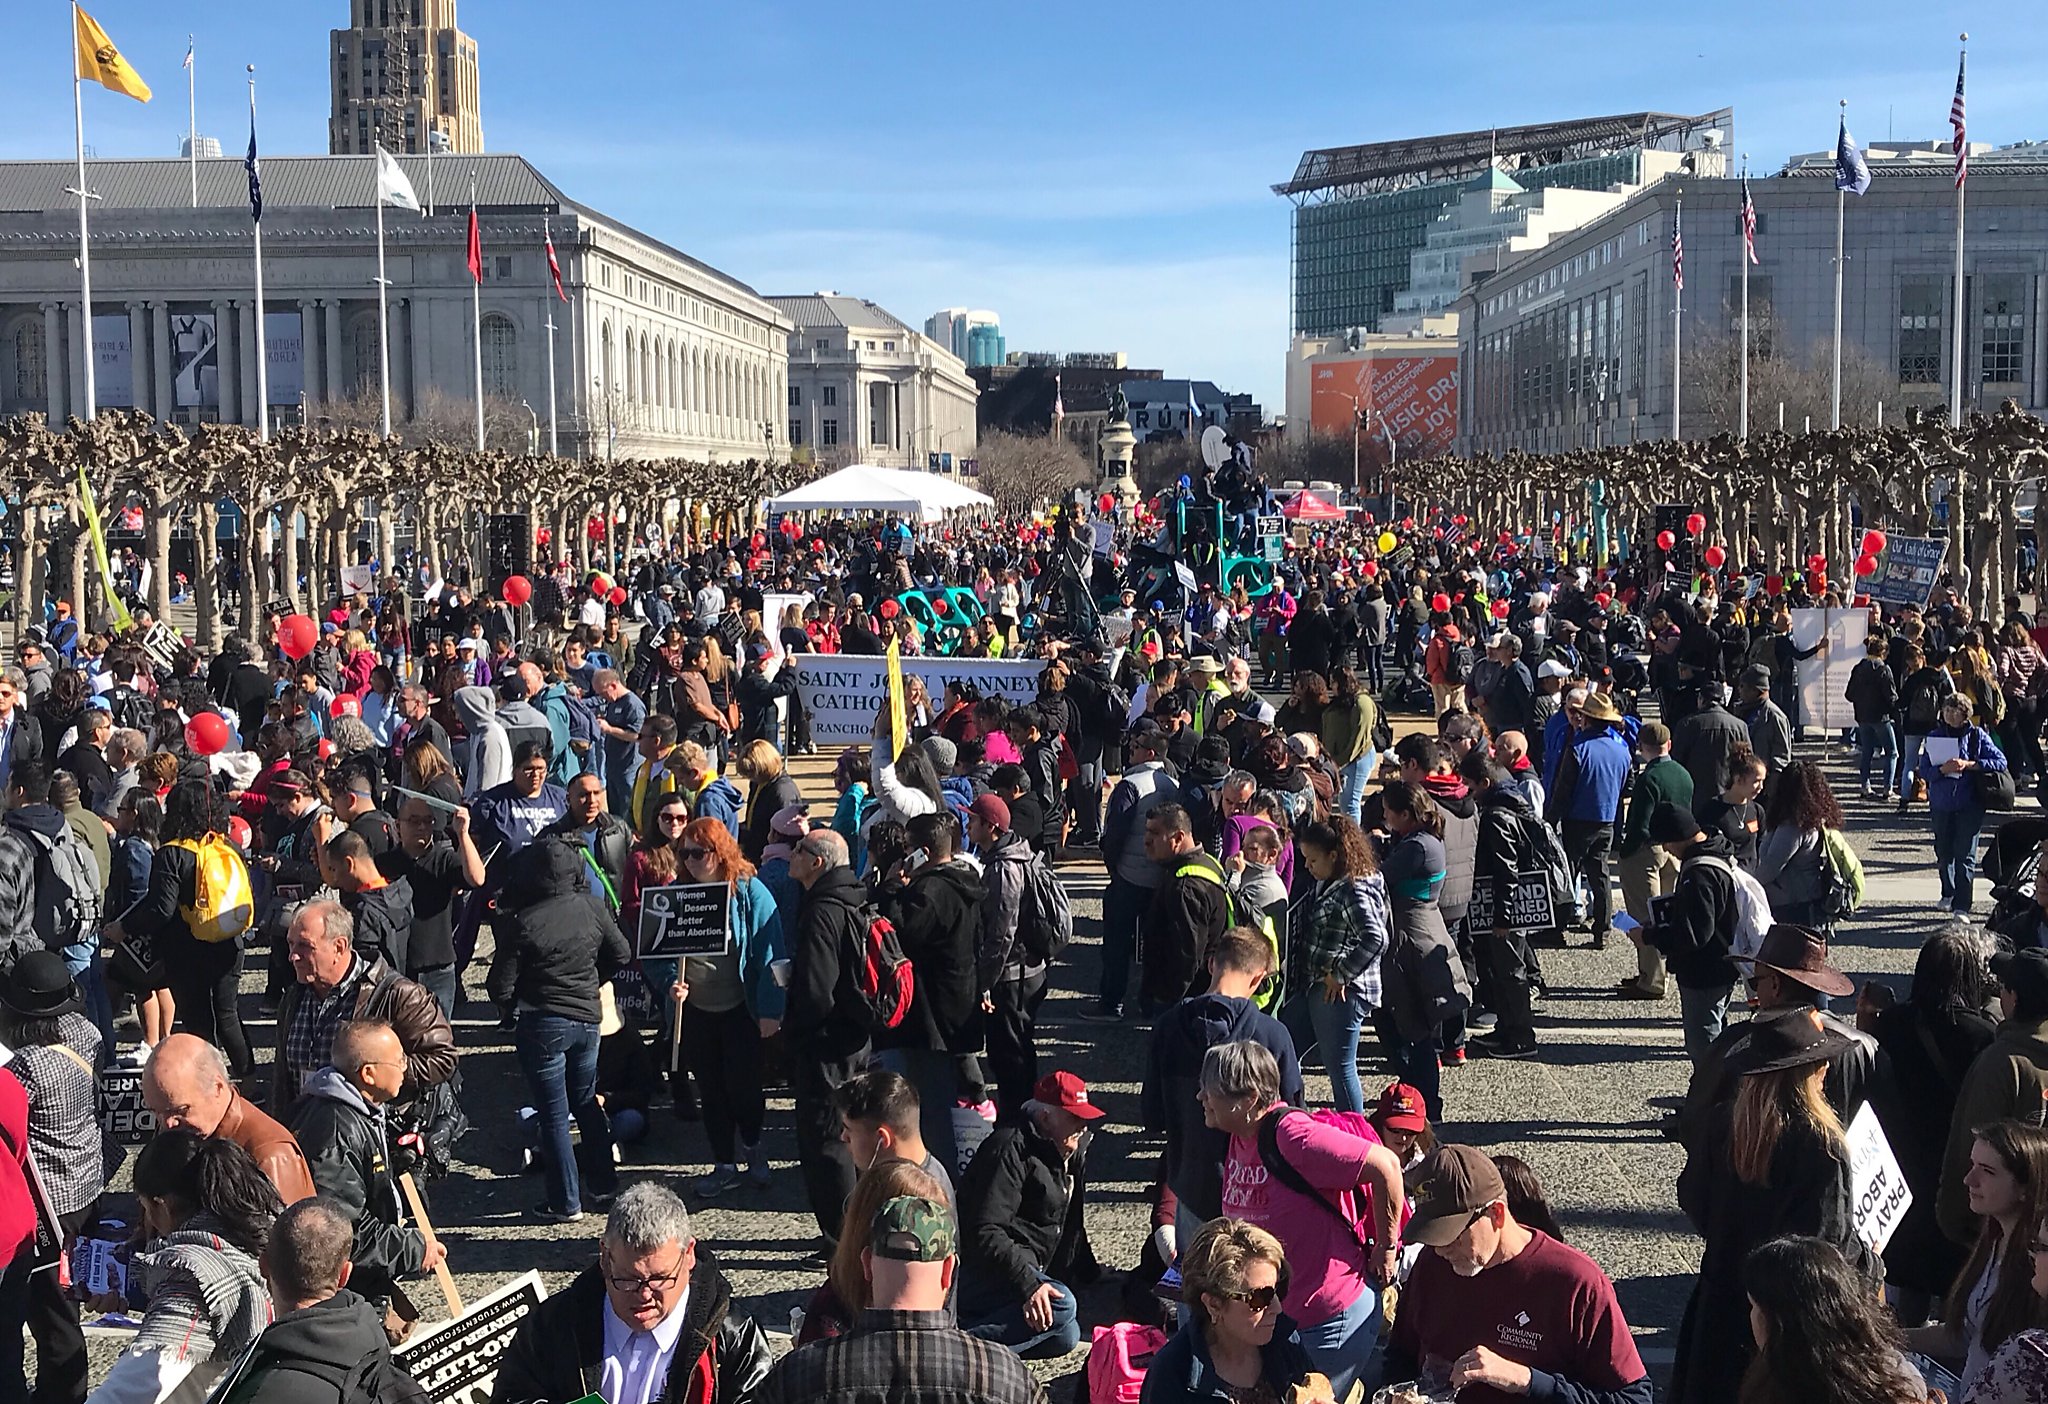 March for Life brings huge crowd to SF streets SFGate